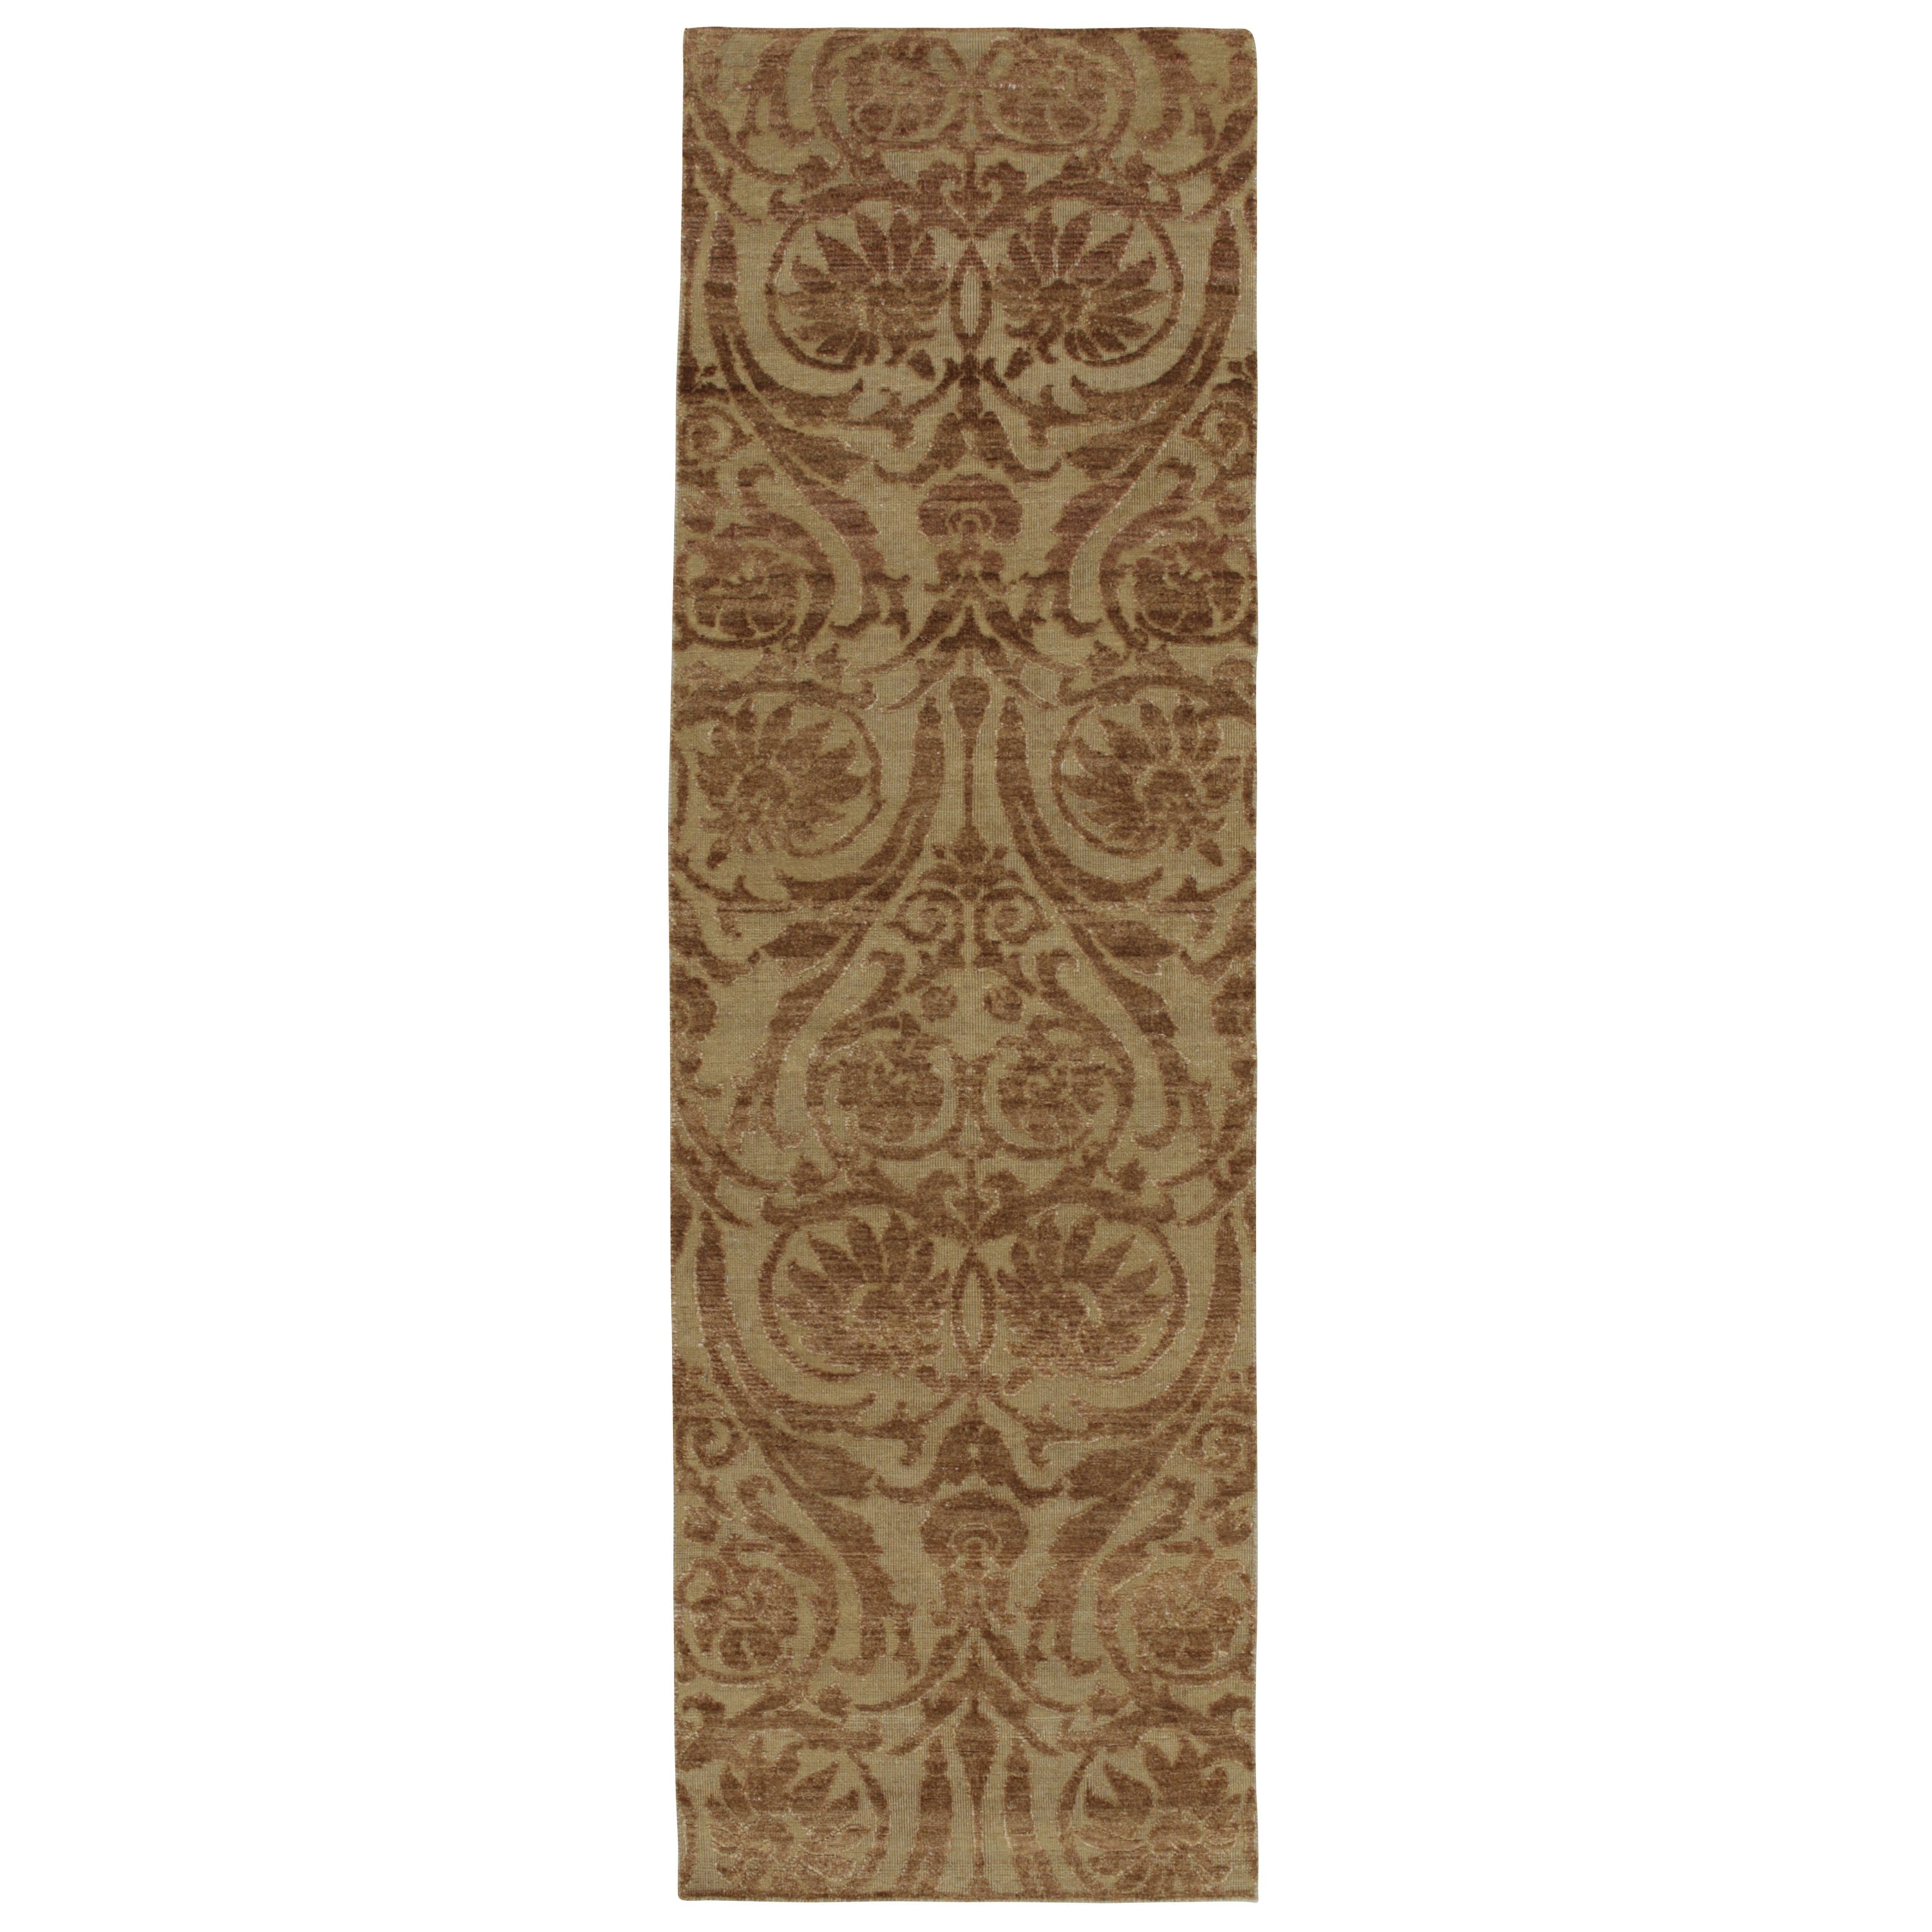 Rug & Kilim’s European style Runners in Beige with Brown Floral Patterns For Sale